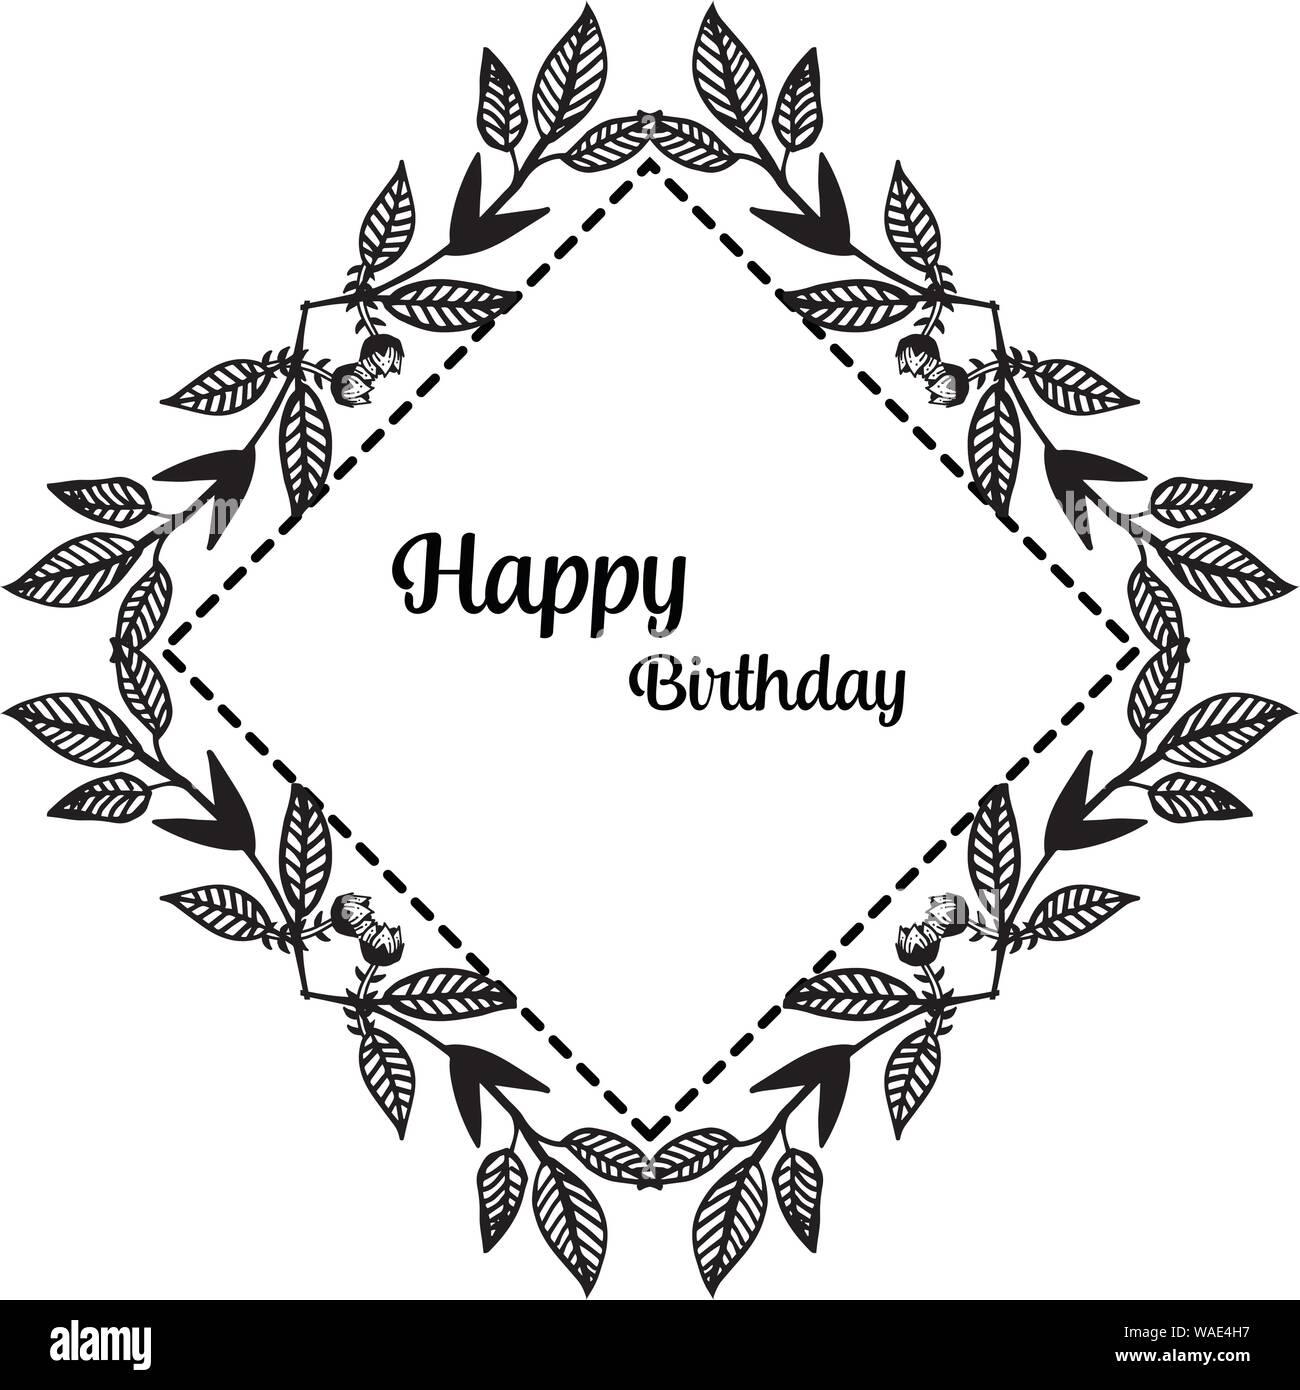 Vintage card happy birthday, texture beautiful wreath frame, isolated ...